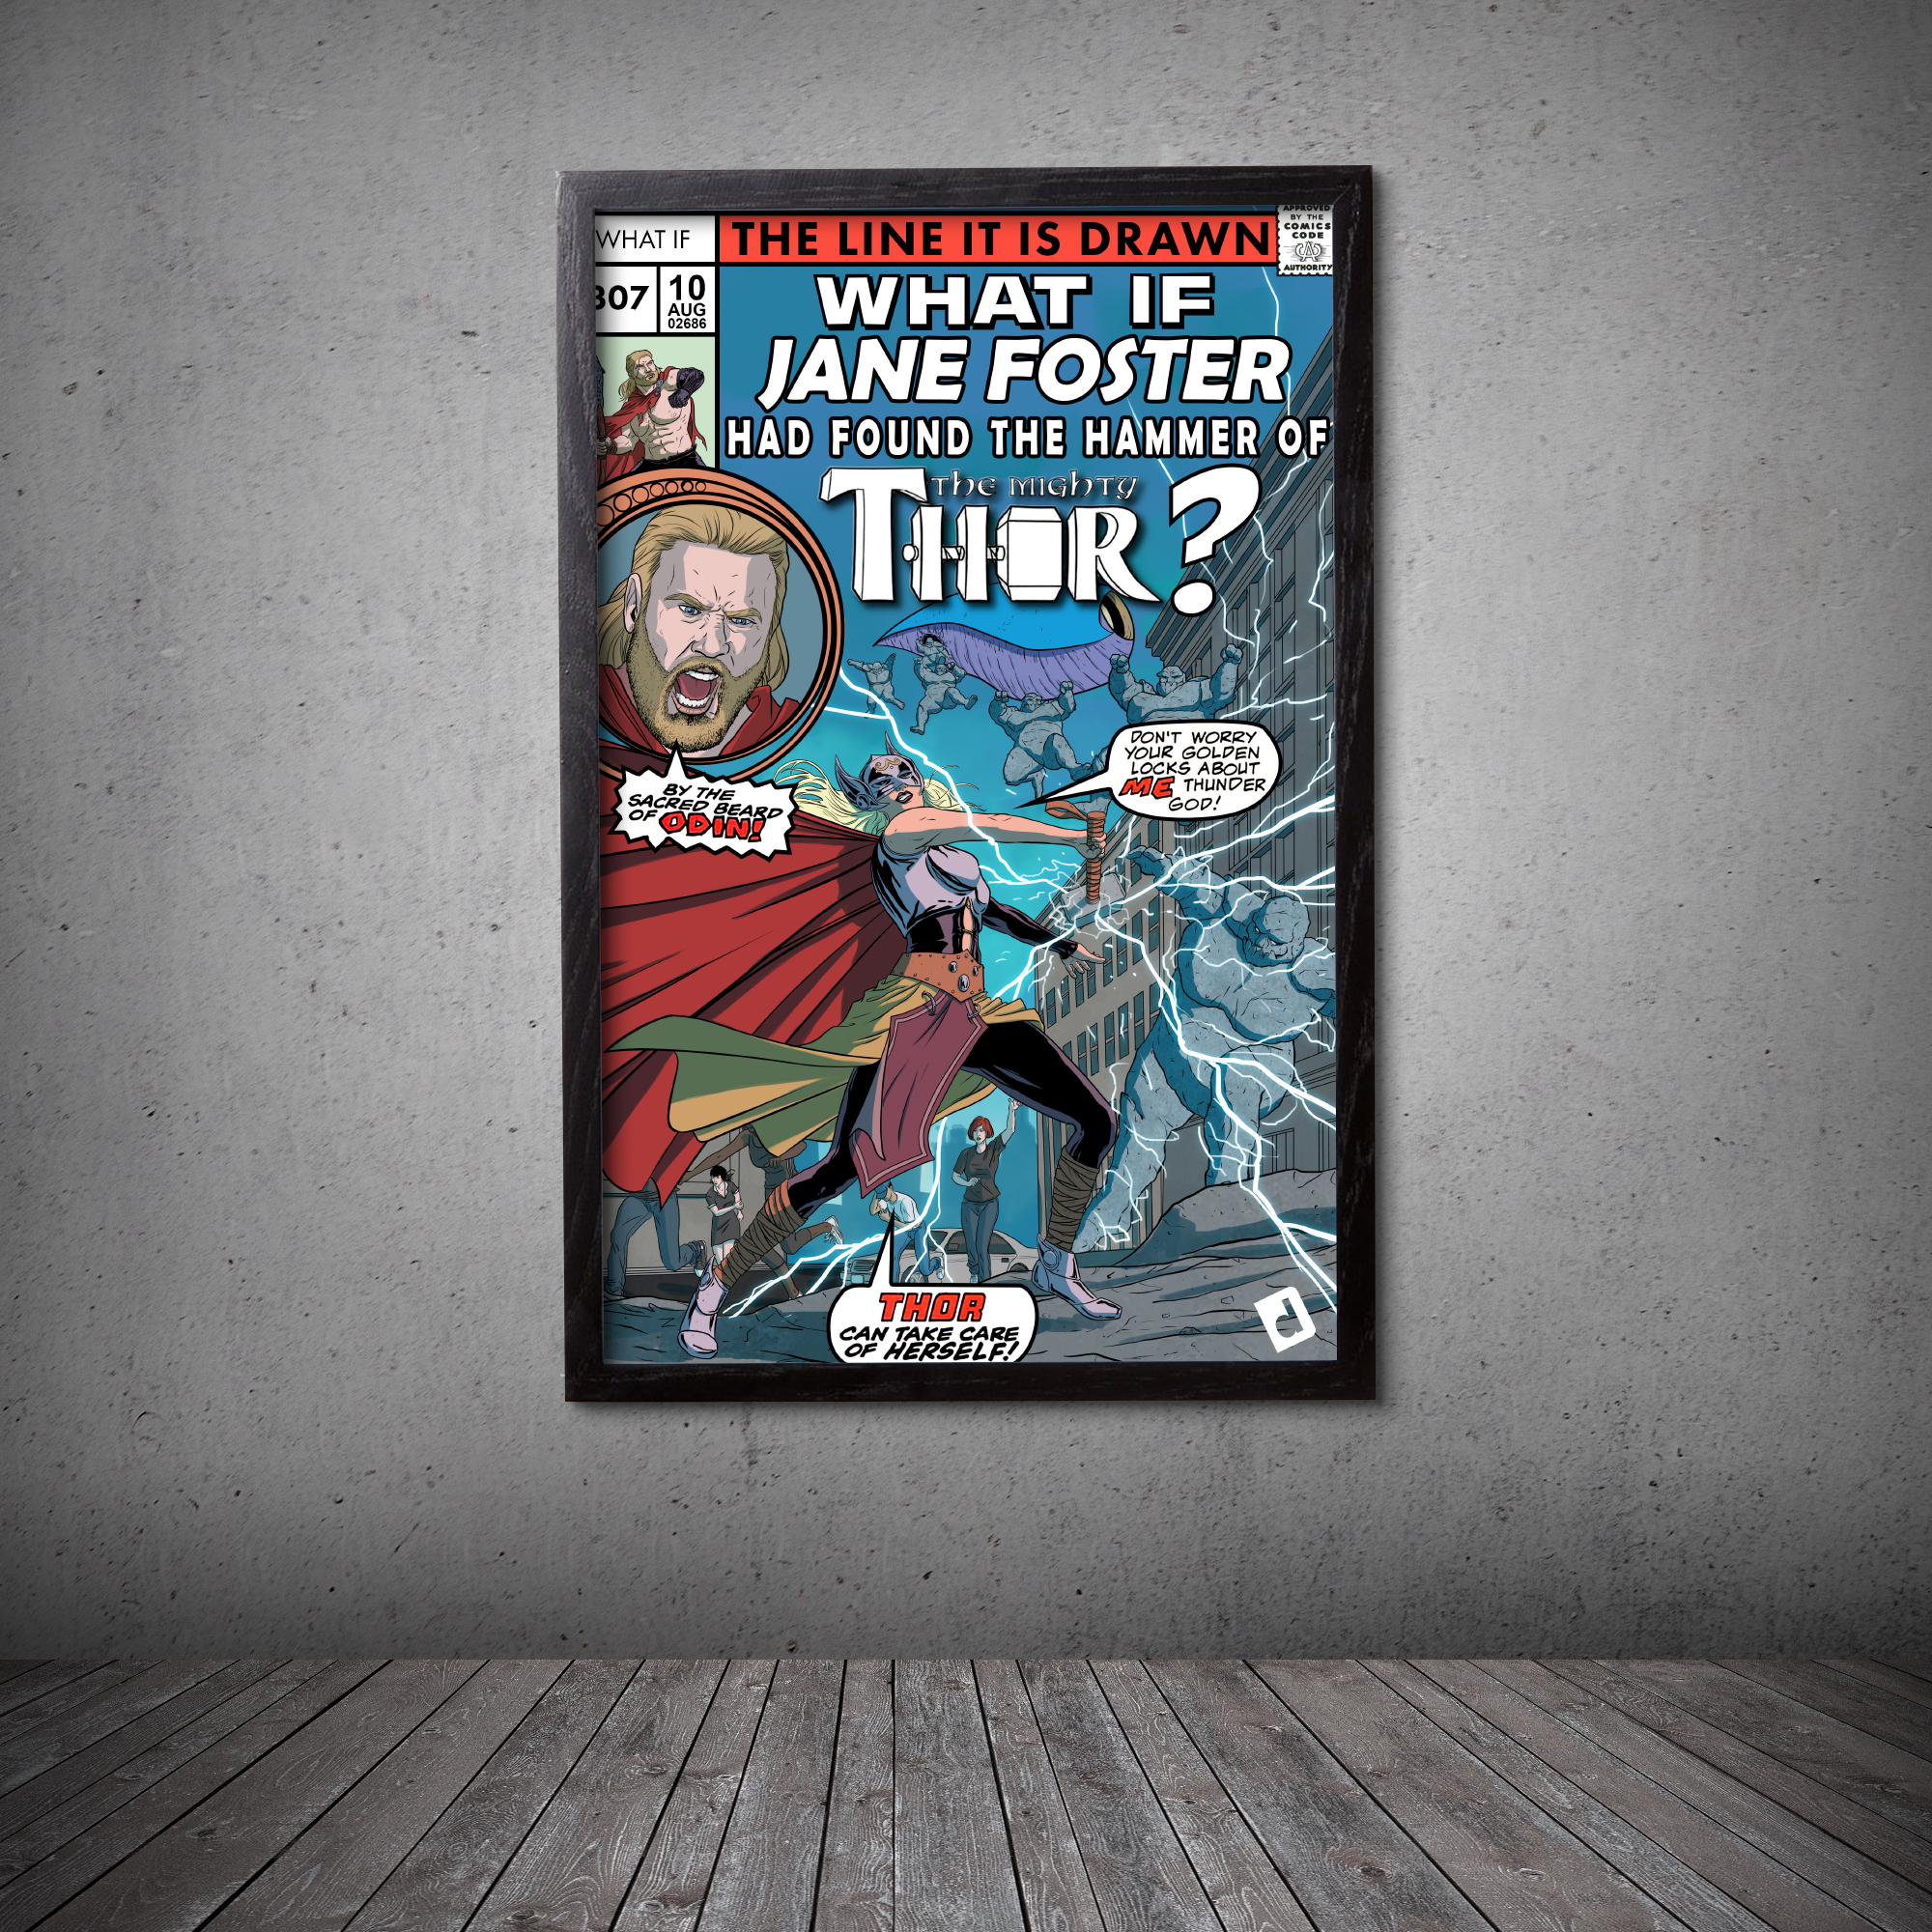 What if Jane Foster was Thor by Duke